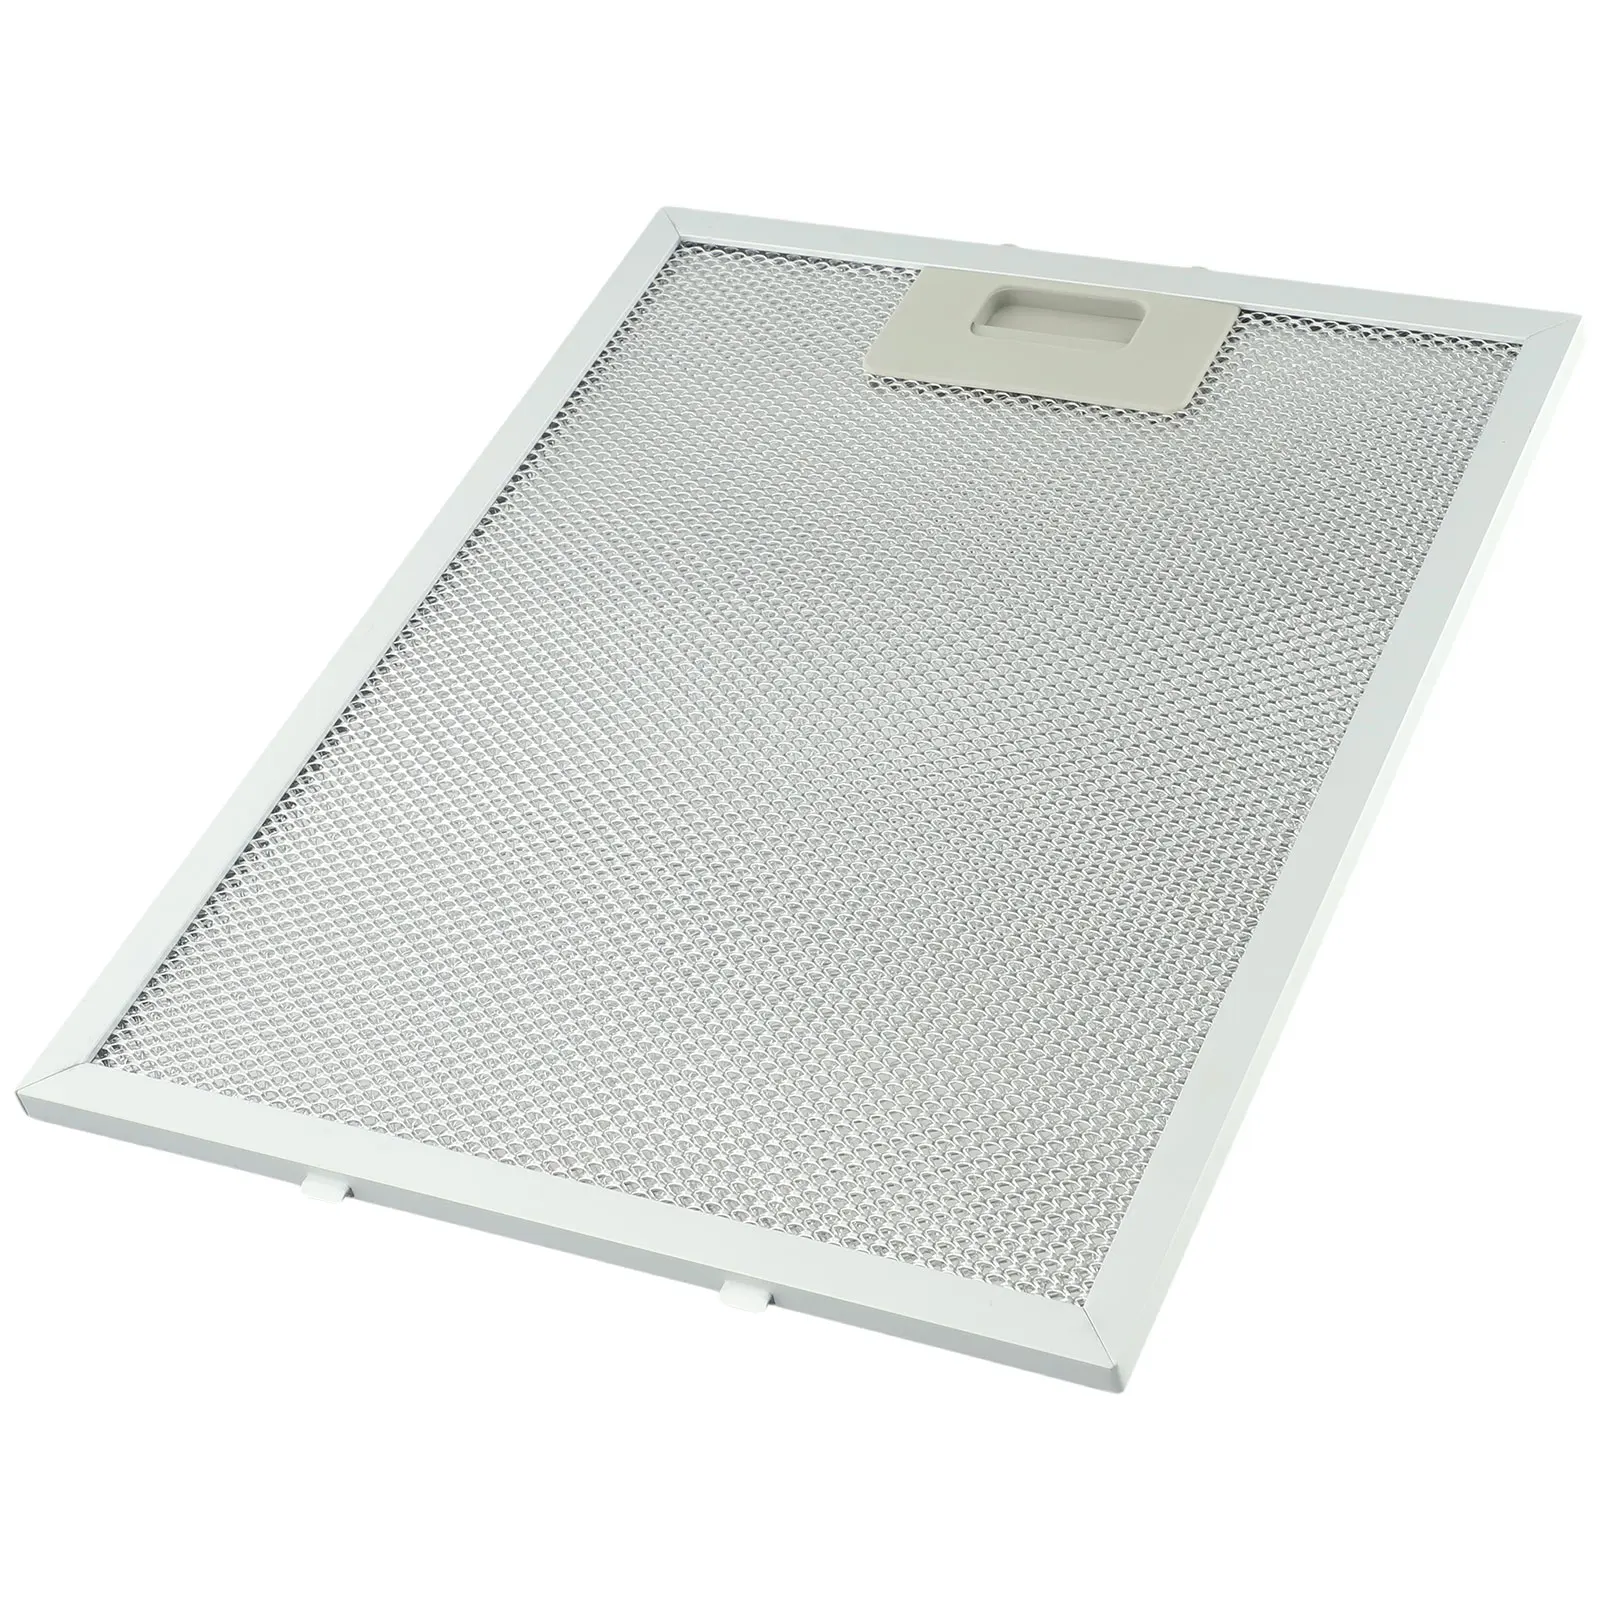 

Durable Newest Filter Filter 300 X 250 X 9mm Cooker Hood Filters Metal Mesh Extractor Silver Vent Filter Filter